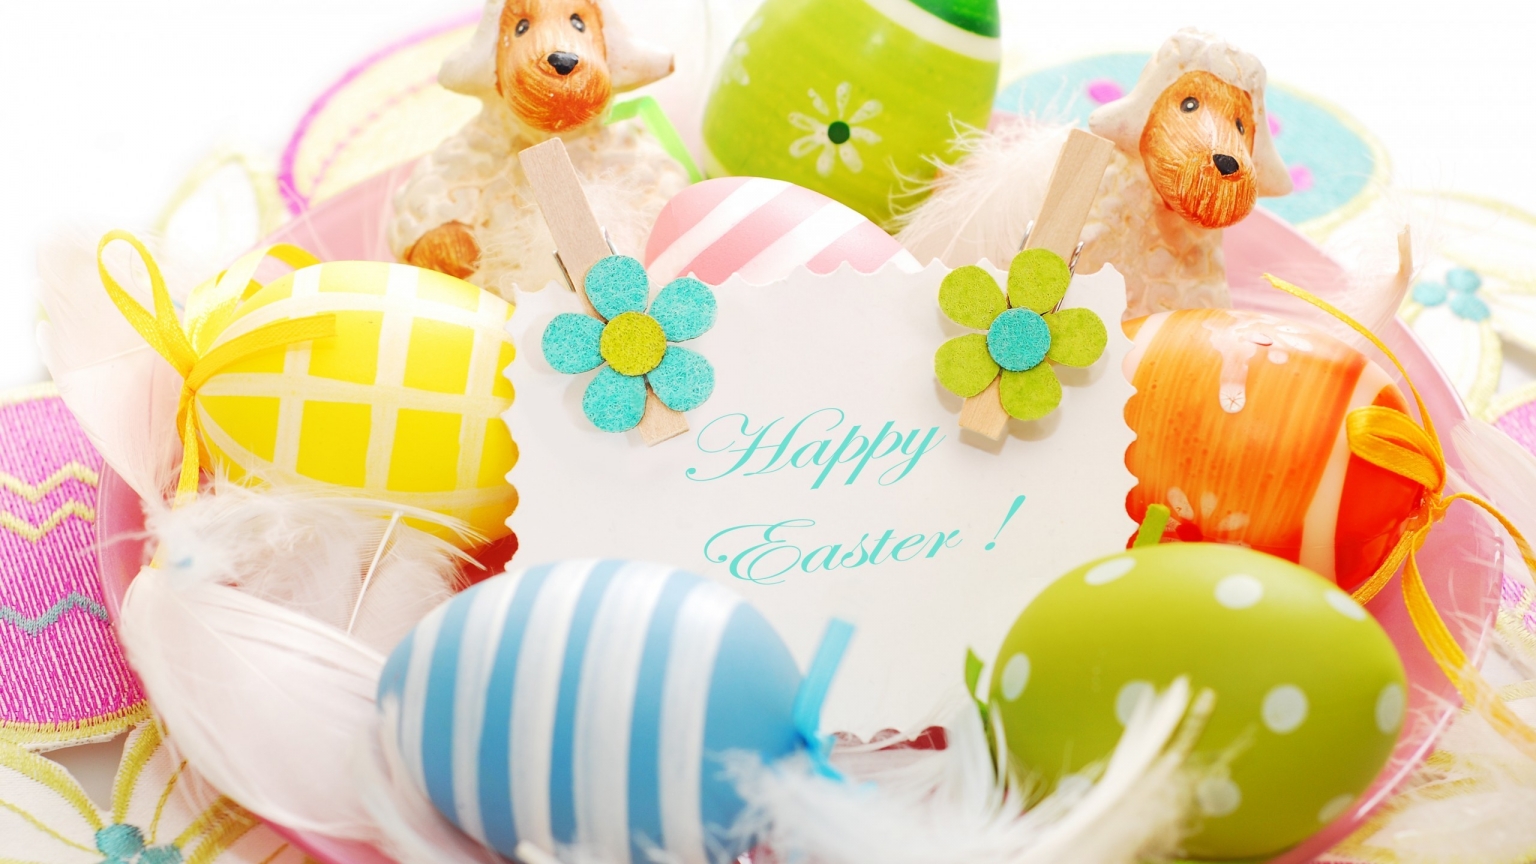 2014 Happy Easter Decorations for 1536 x 864 HDTV resolution